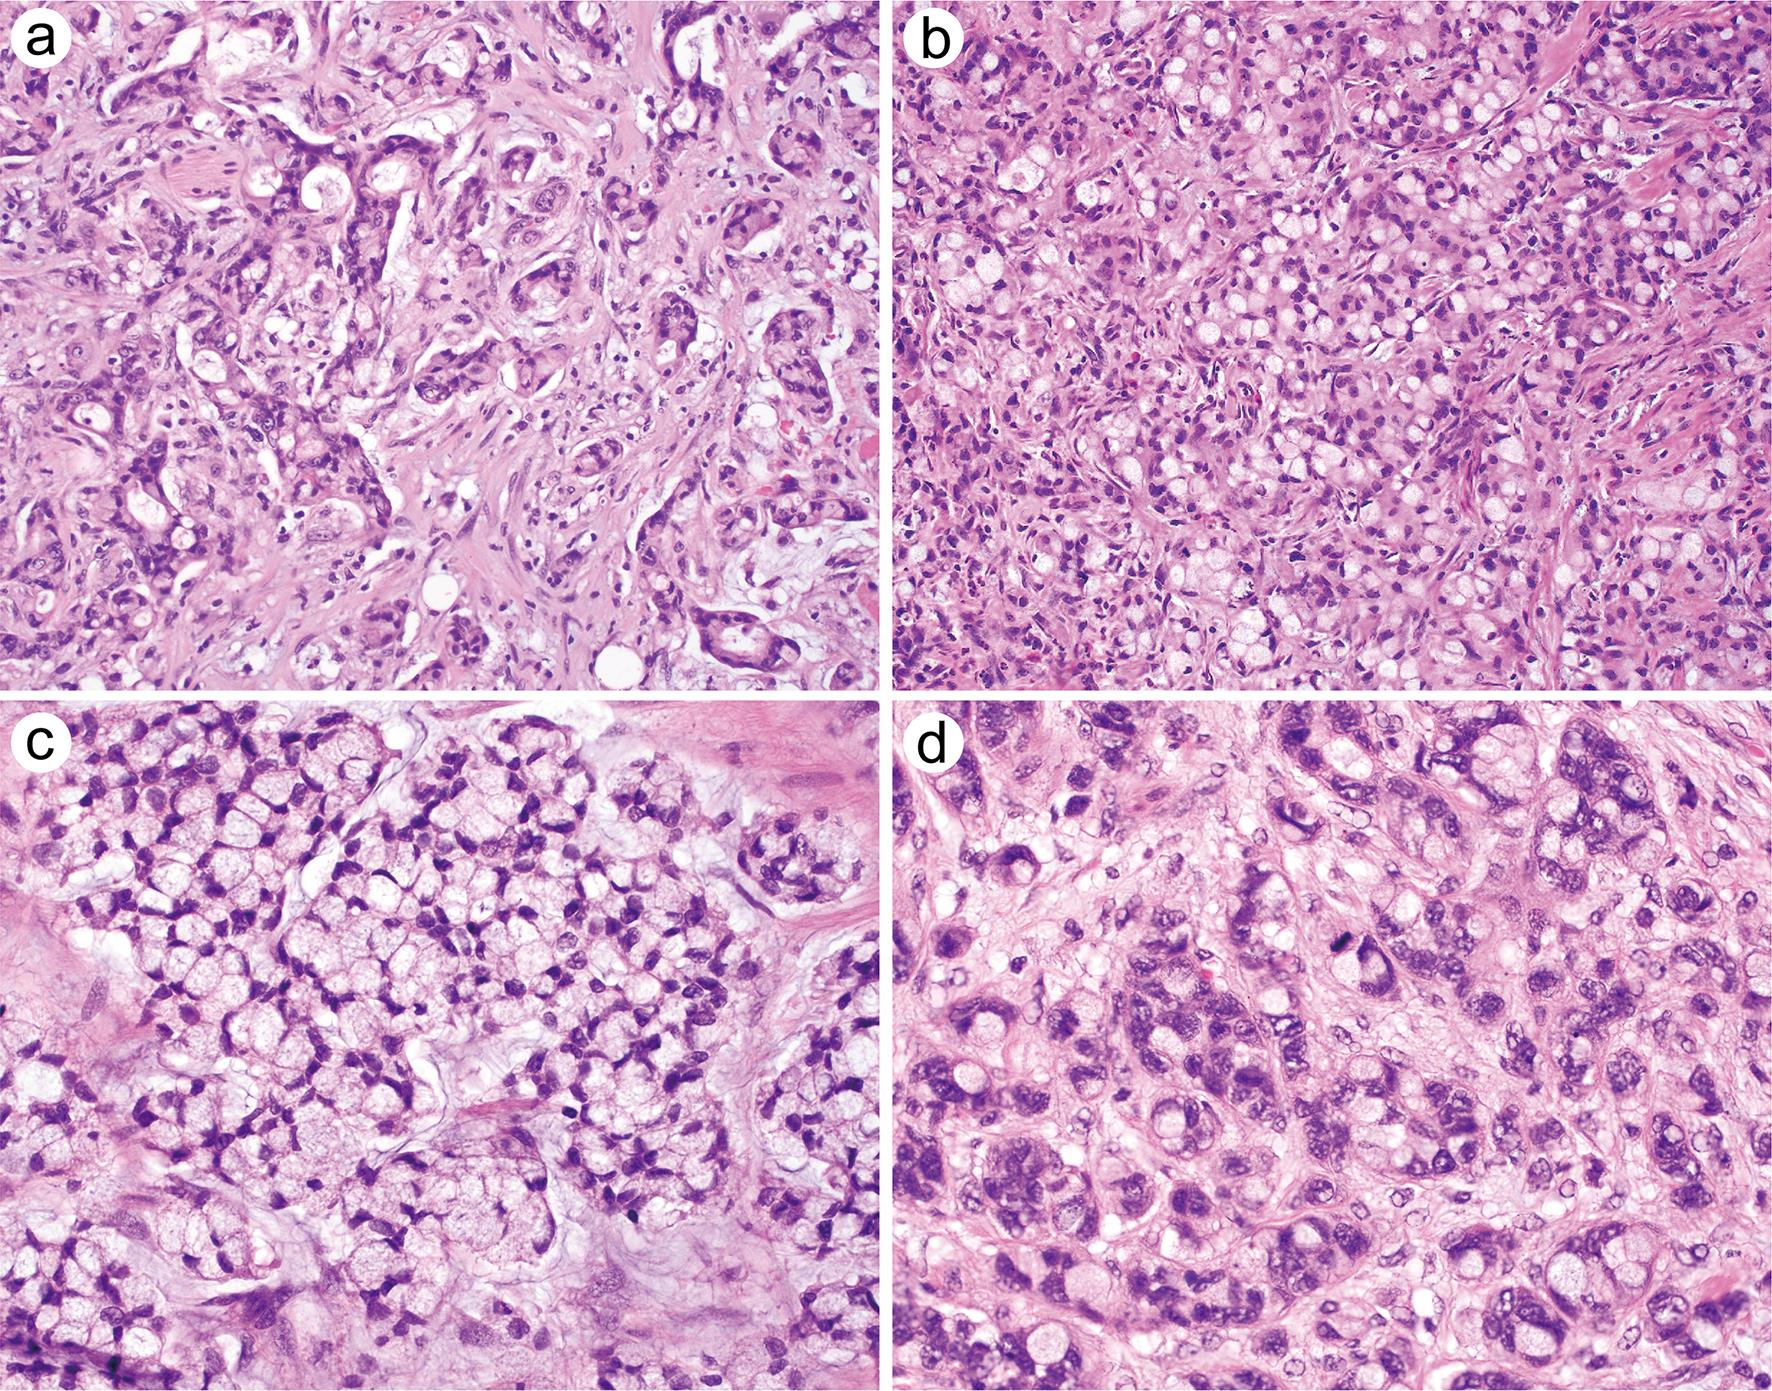 High-grade patterns of goblet cell adenocarcinoma showing conventional adenocarcinomatous component in a desmoplastic stroma (a, original magnification ×200) and/or large irregular sheets of goblet-like or signet-ring-like cells (b, original magnification ×200).